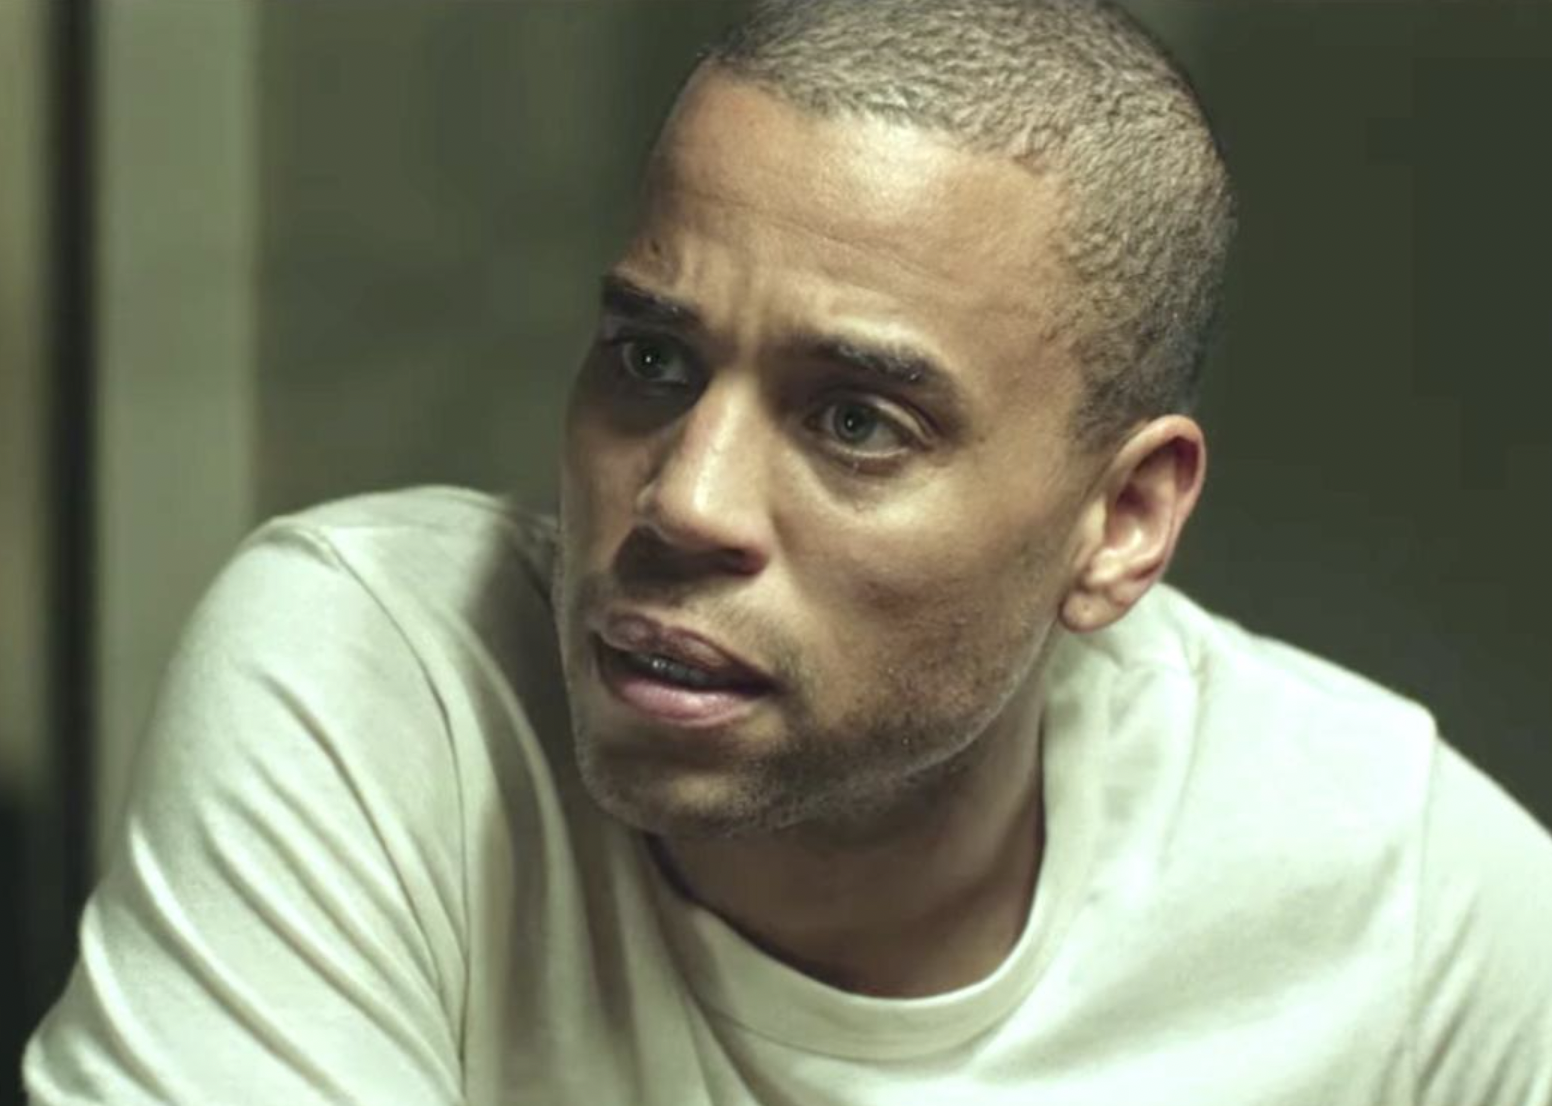 Michael Ealy in "Jacob